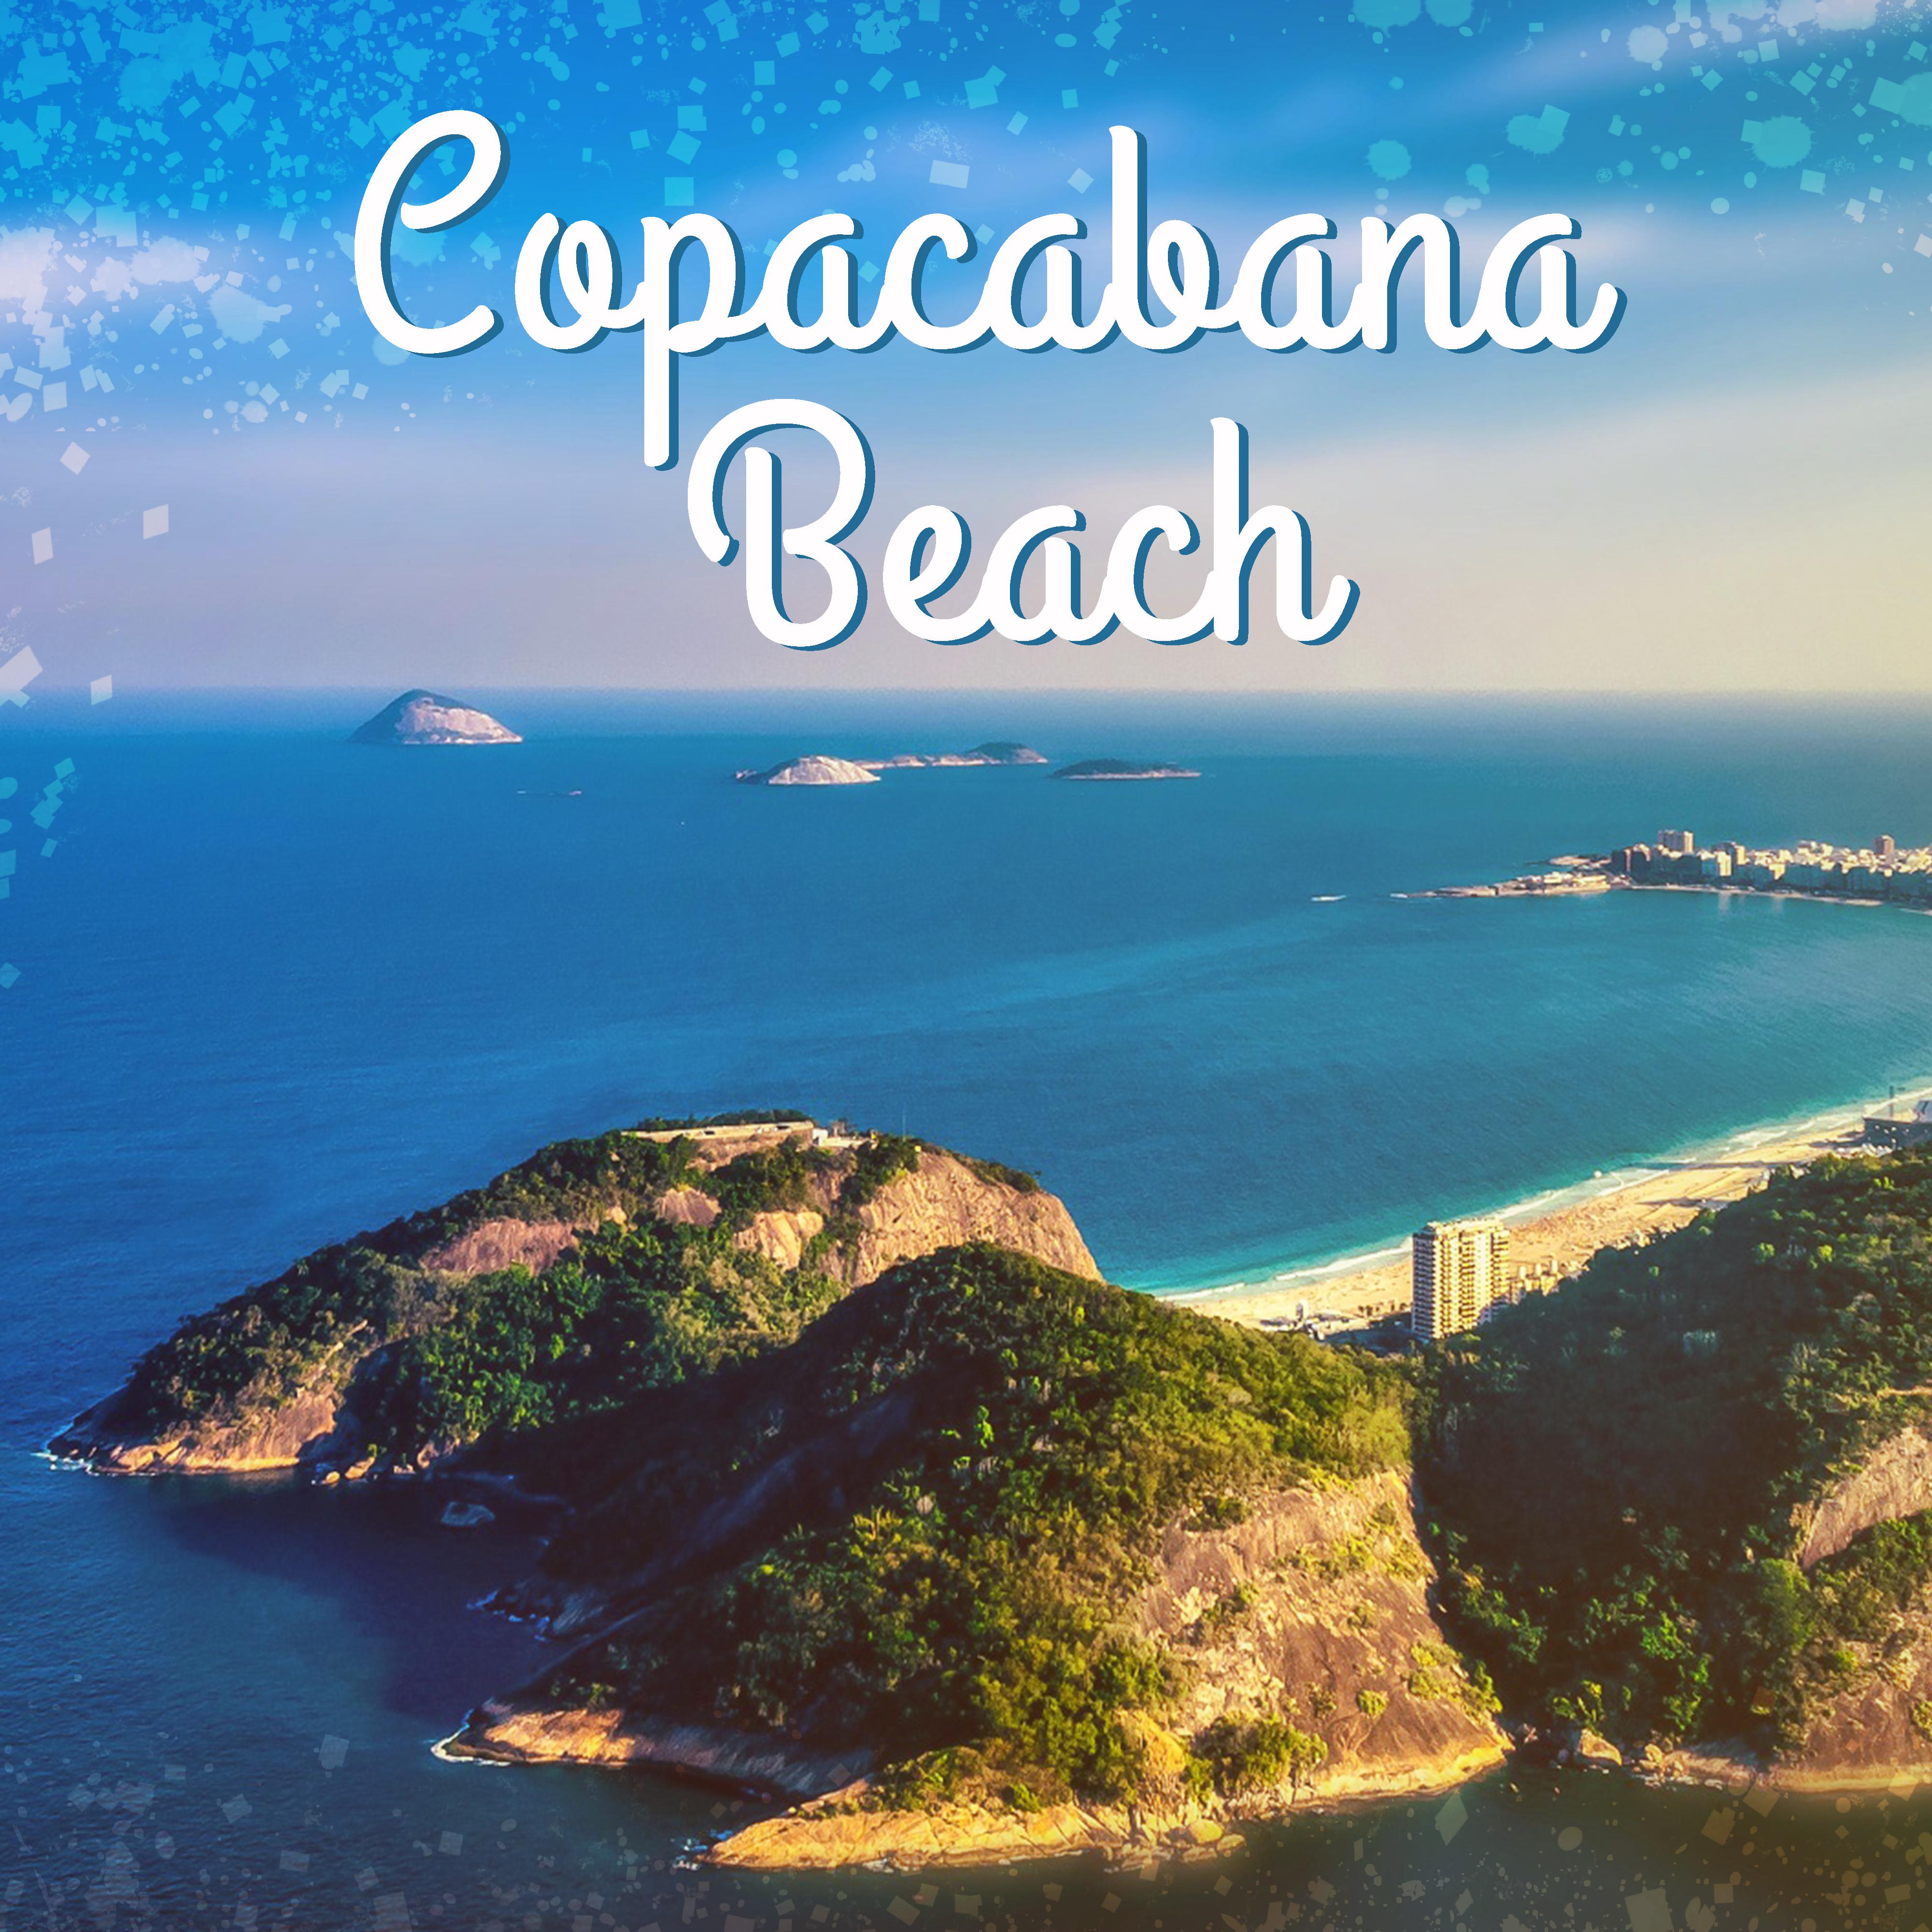 Copacabana Beach – Dance Party, Holiday Chill Out 2017, Electronic Beats, **** Vibes, Beach Party, Summer Hits